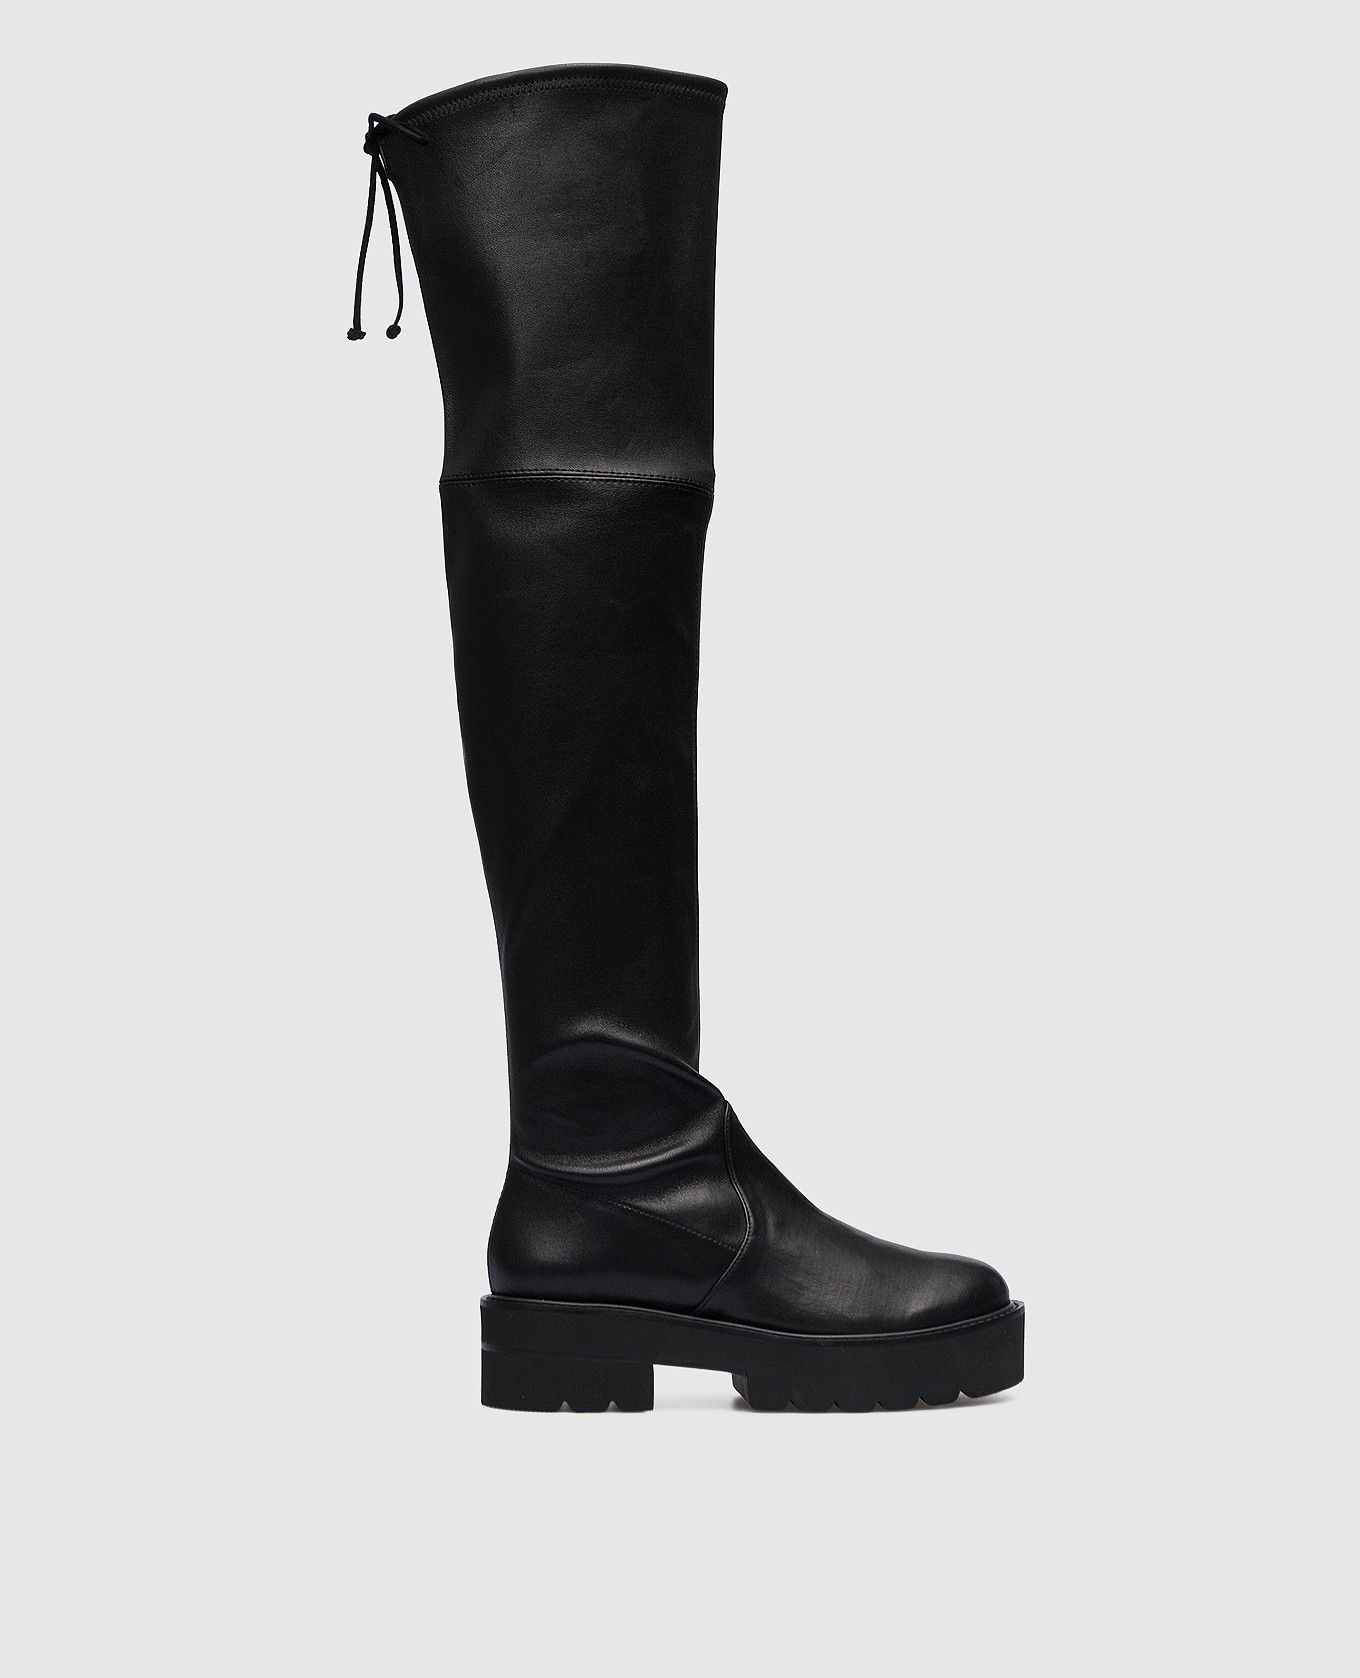 Lowland Ultralift black leather boots